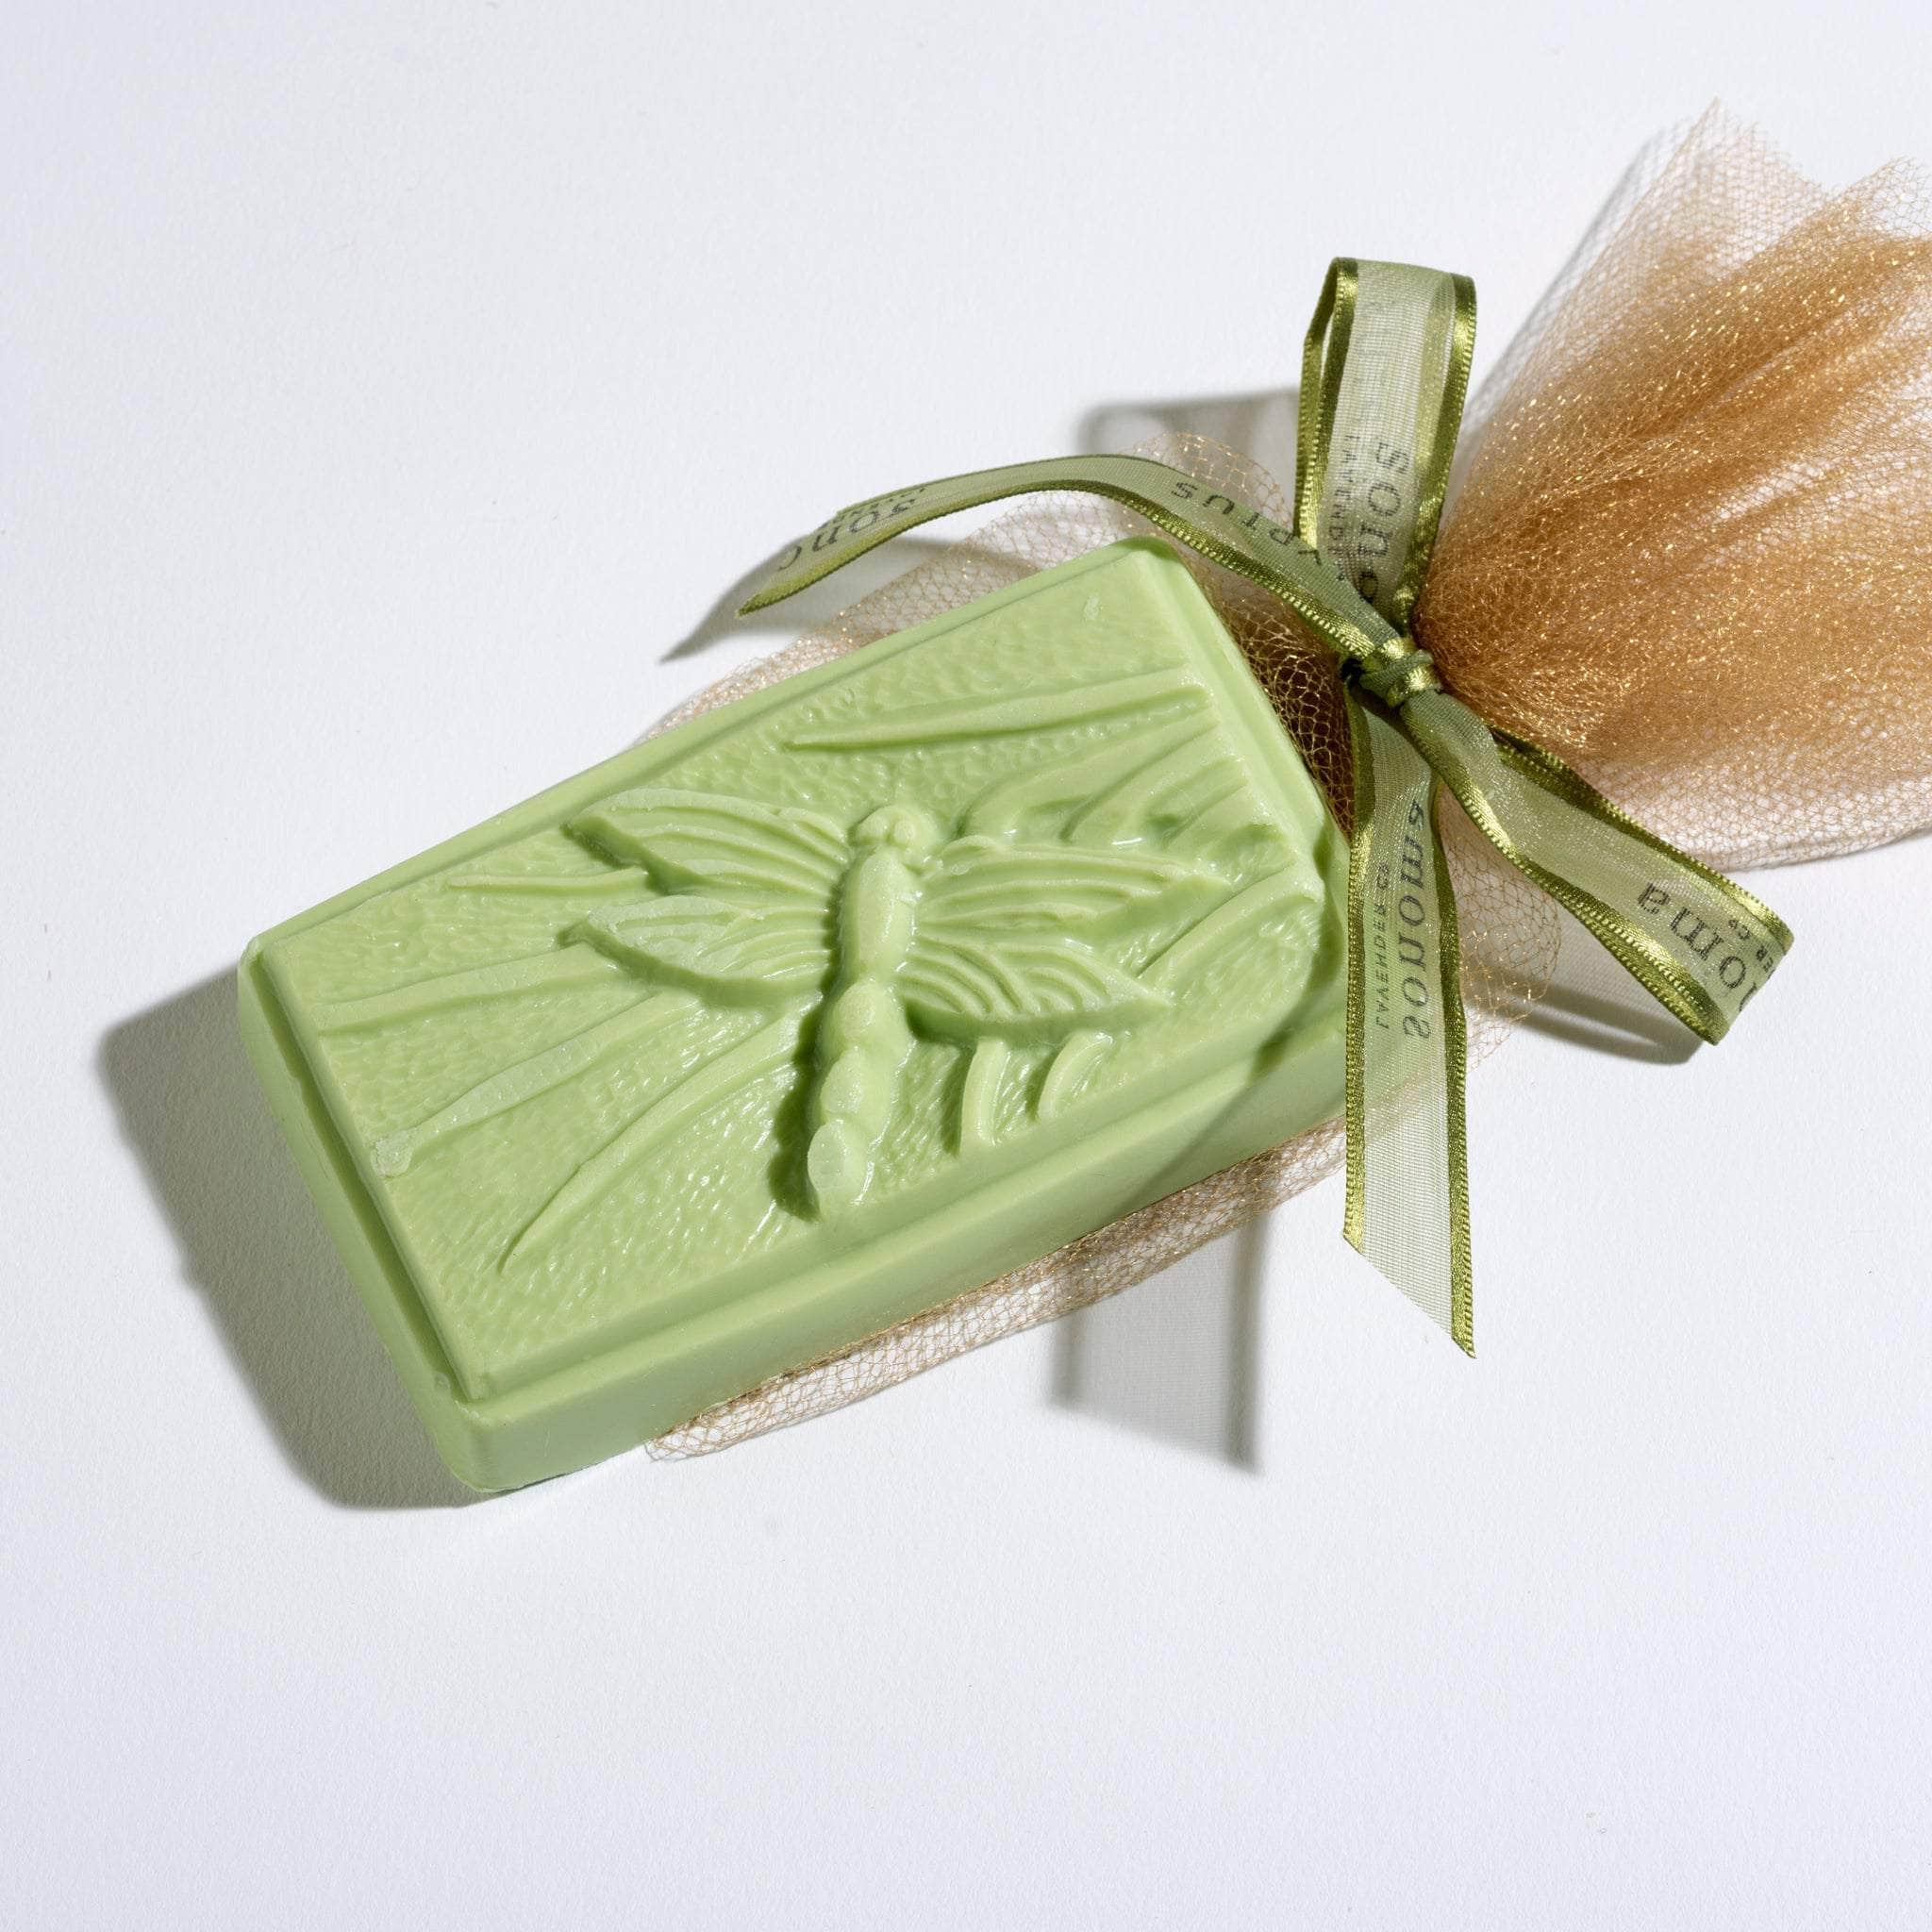 Eucalyptus Dragonfly-Shaped Guest Soap